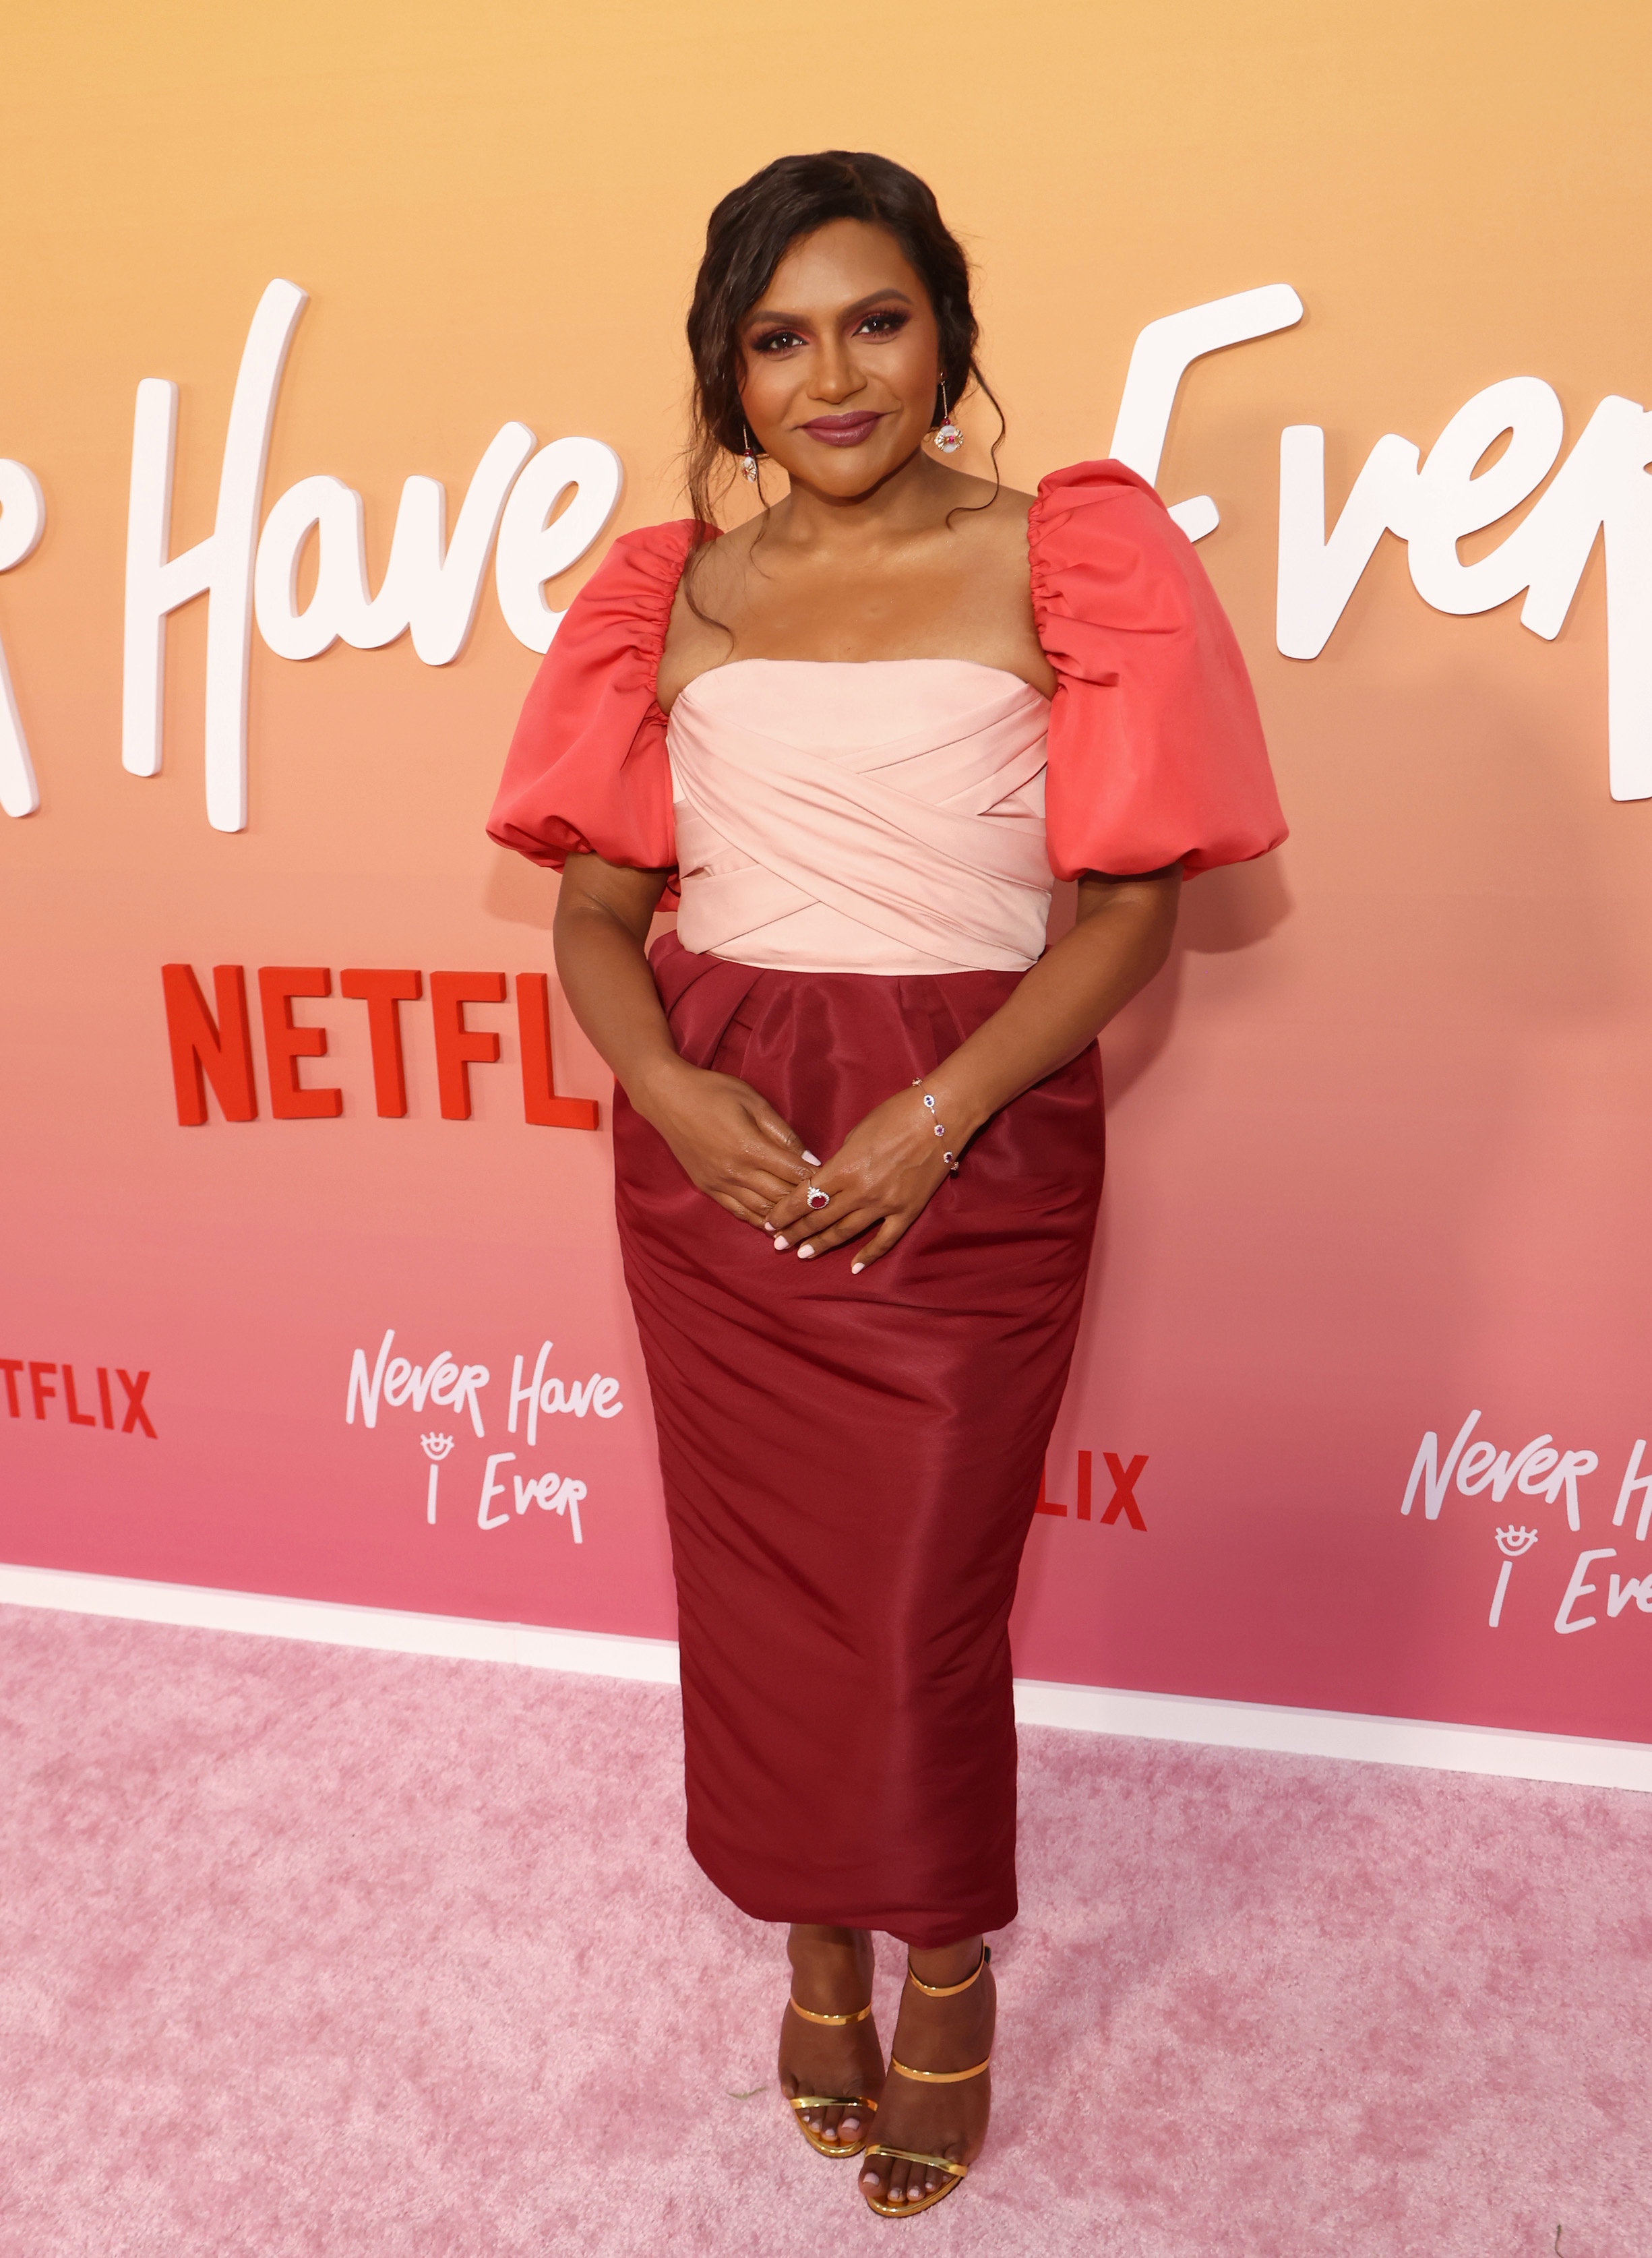 christy lindley recommends mindy kaling ever nude pic